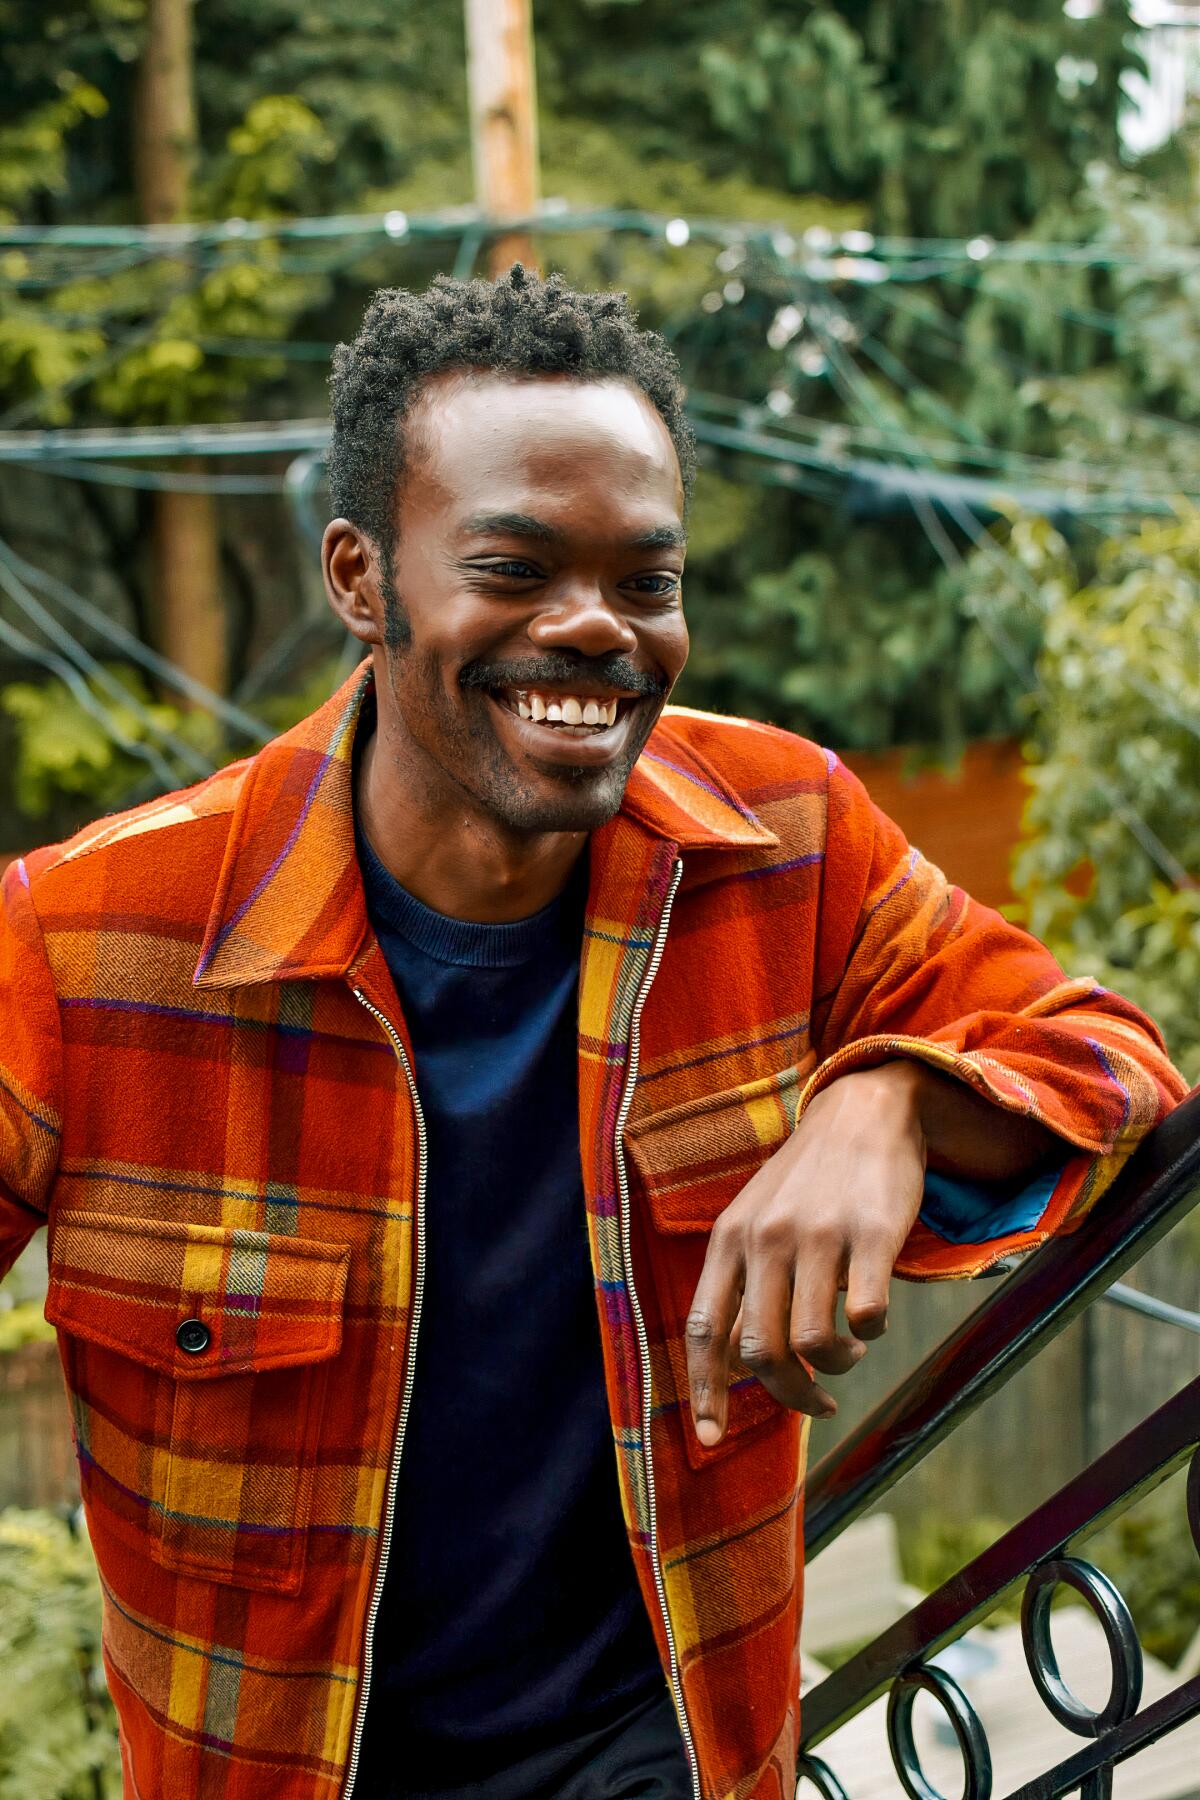 William Jackson Harper in an orange and yellow plaid jacket in a backyard